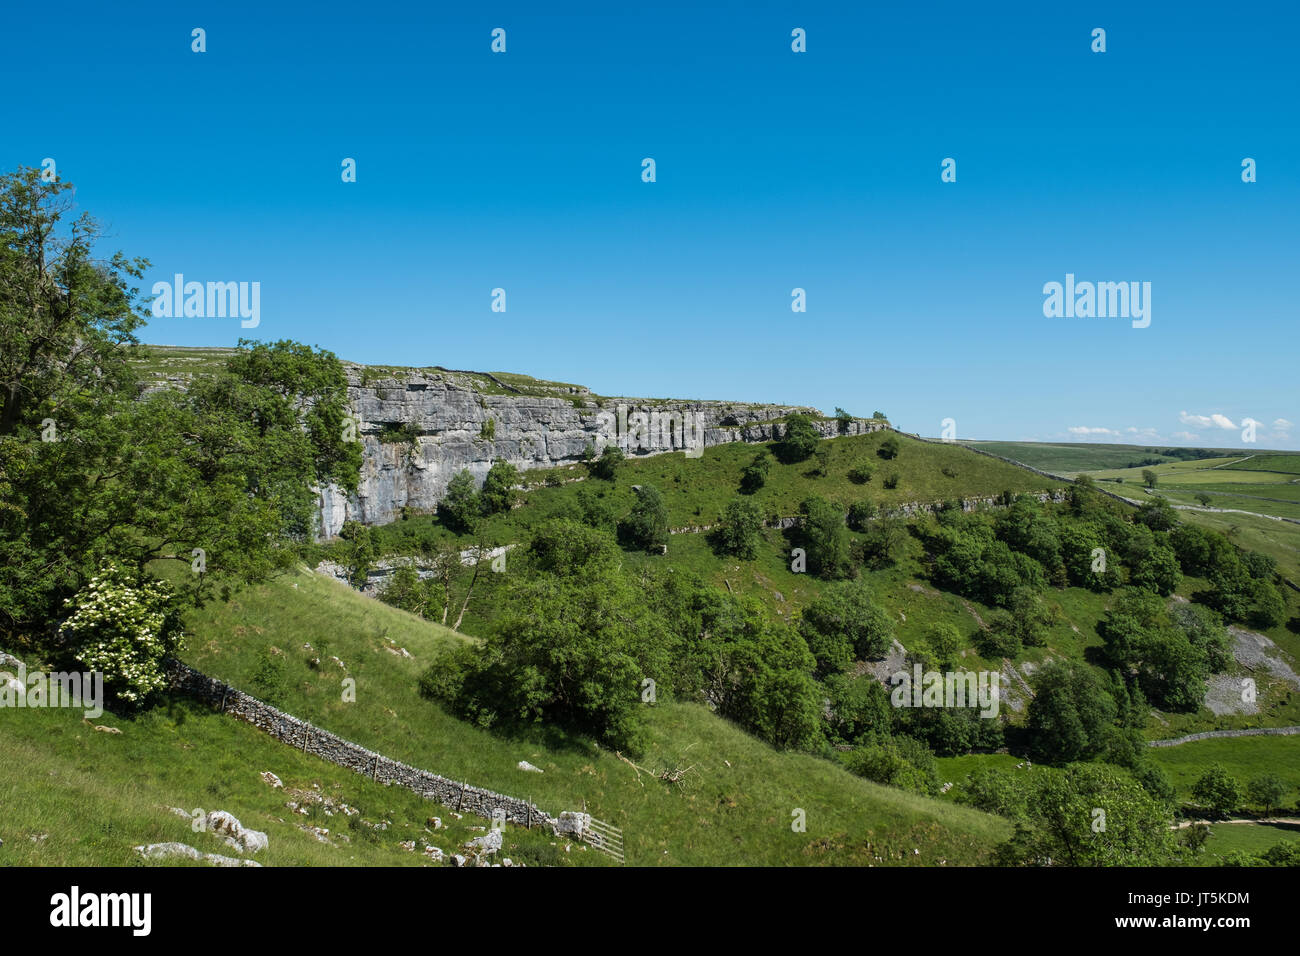 The Exposed Limestone Cliffs at Malham Cove Stock Photo